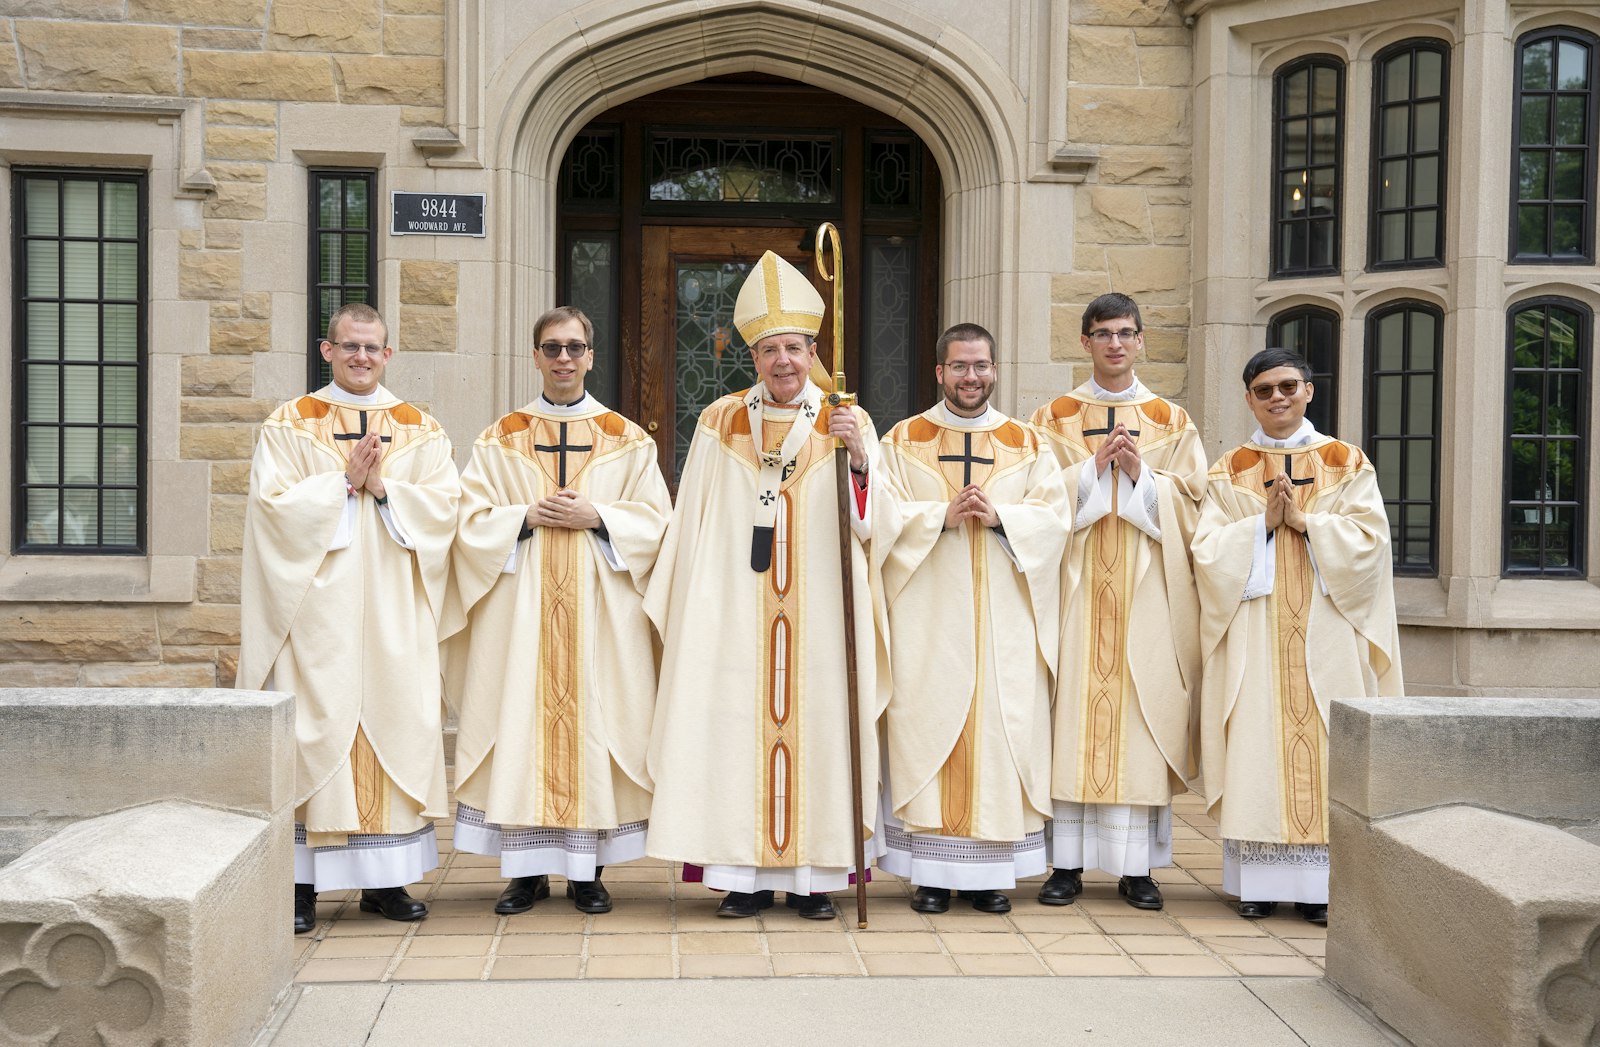 Archbishop Allen H. Vigneron, center, stands with five new priests ordained May 18 for the Archdiocese of Detroit at the Cathedral of the Most Blessed Sacrament. Left to right, the new priests are Fr. Matthew Kurt, 28, Fr. Nicholas Brown, 31, Fr. Stephen Moening, 27, Fr. Ryan Asher, 27, and Fr. Phuc (Tommy) Ngo, 31. (Photos by Valaurian Waller | Detroit Catholic)